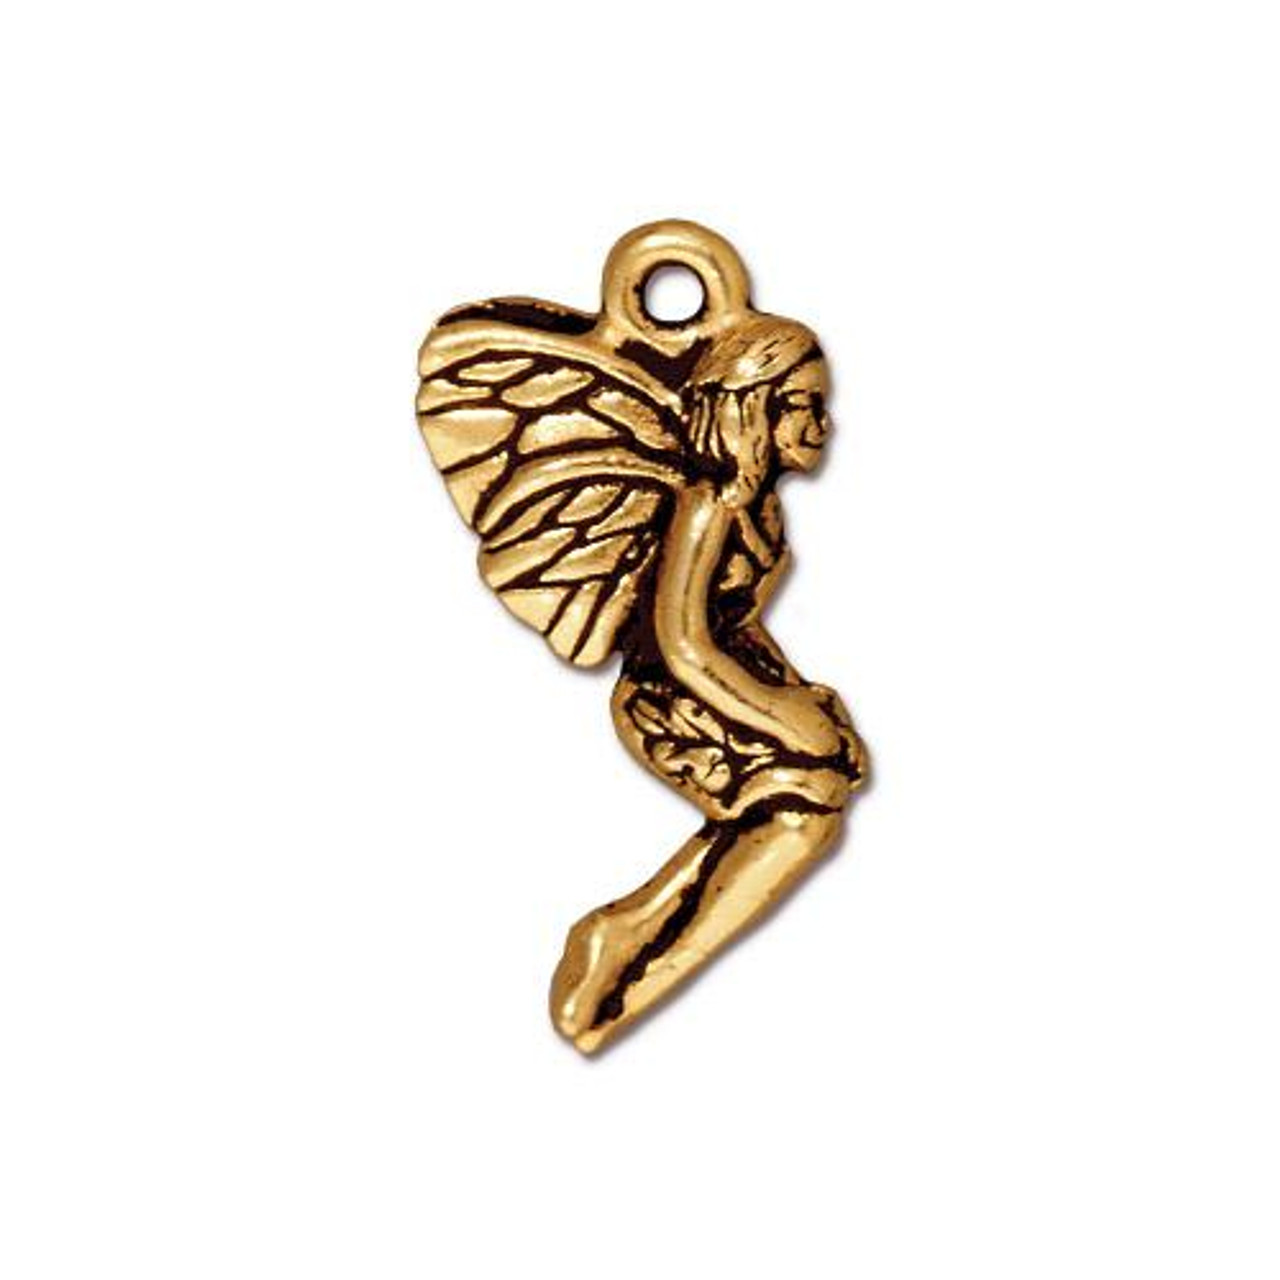 Leaf Fairy Charm, Antiqued Gold Plate, 20 per Pack - TierraCast, Inc.